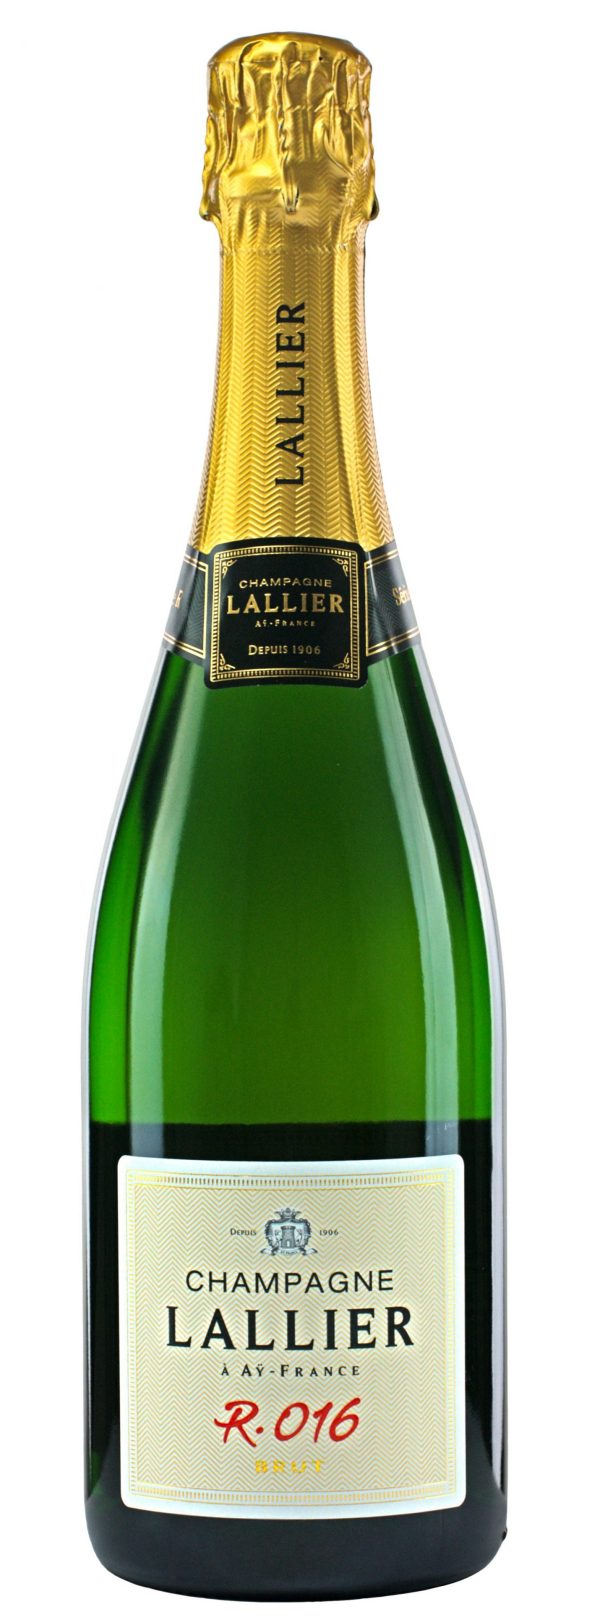 ALL THINGS DRINKS - Champagne Lallier - R16 Vintage Champagne